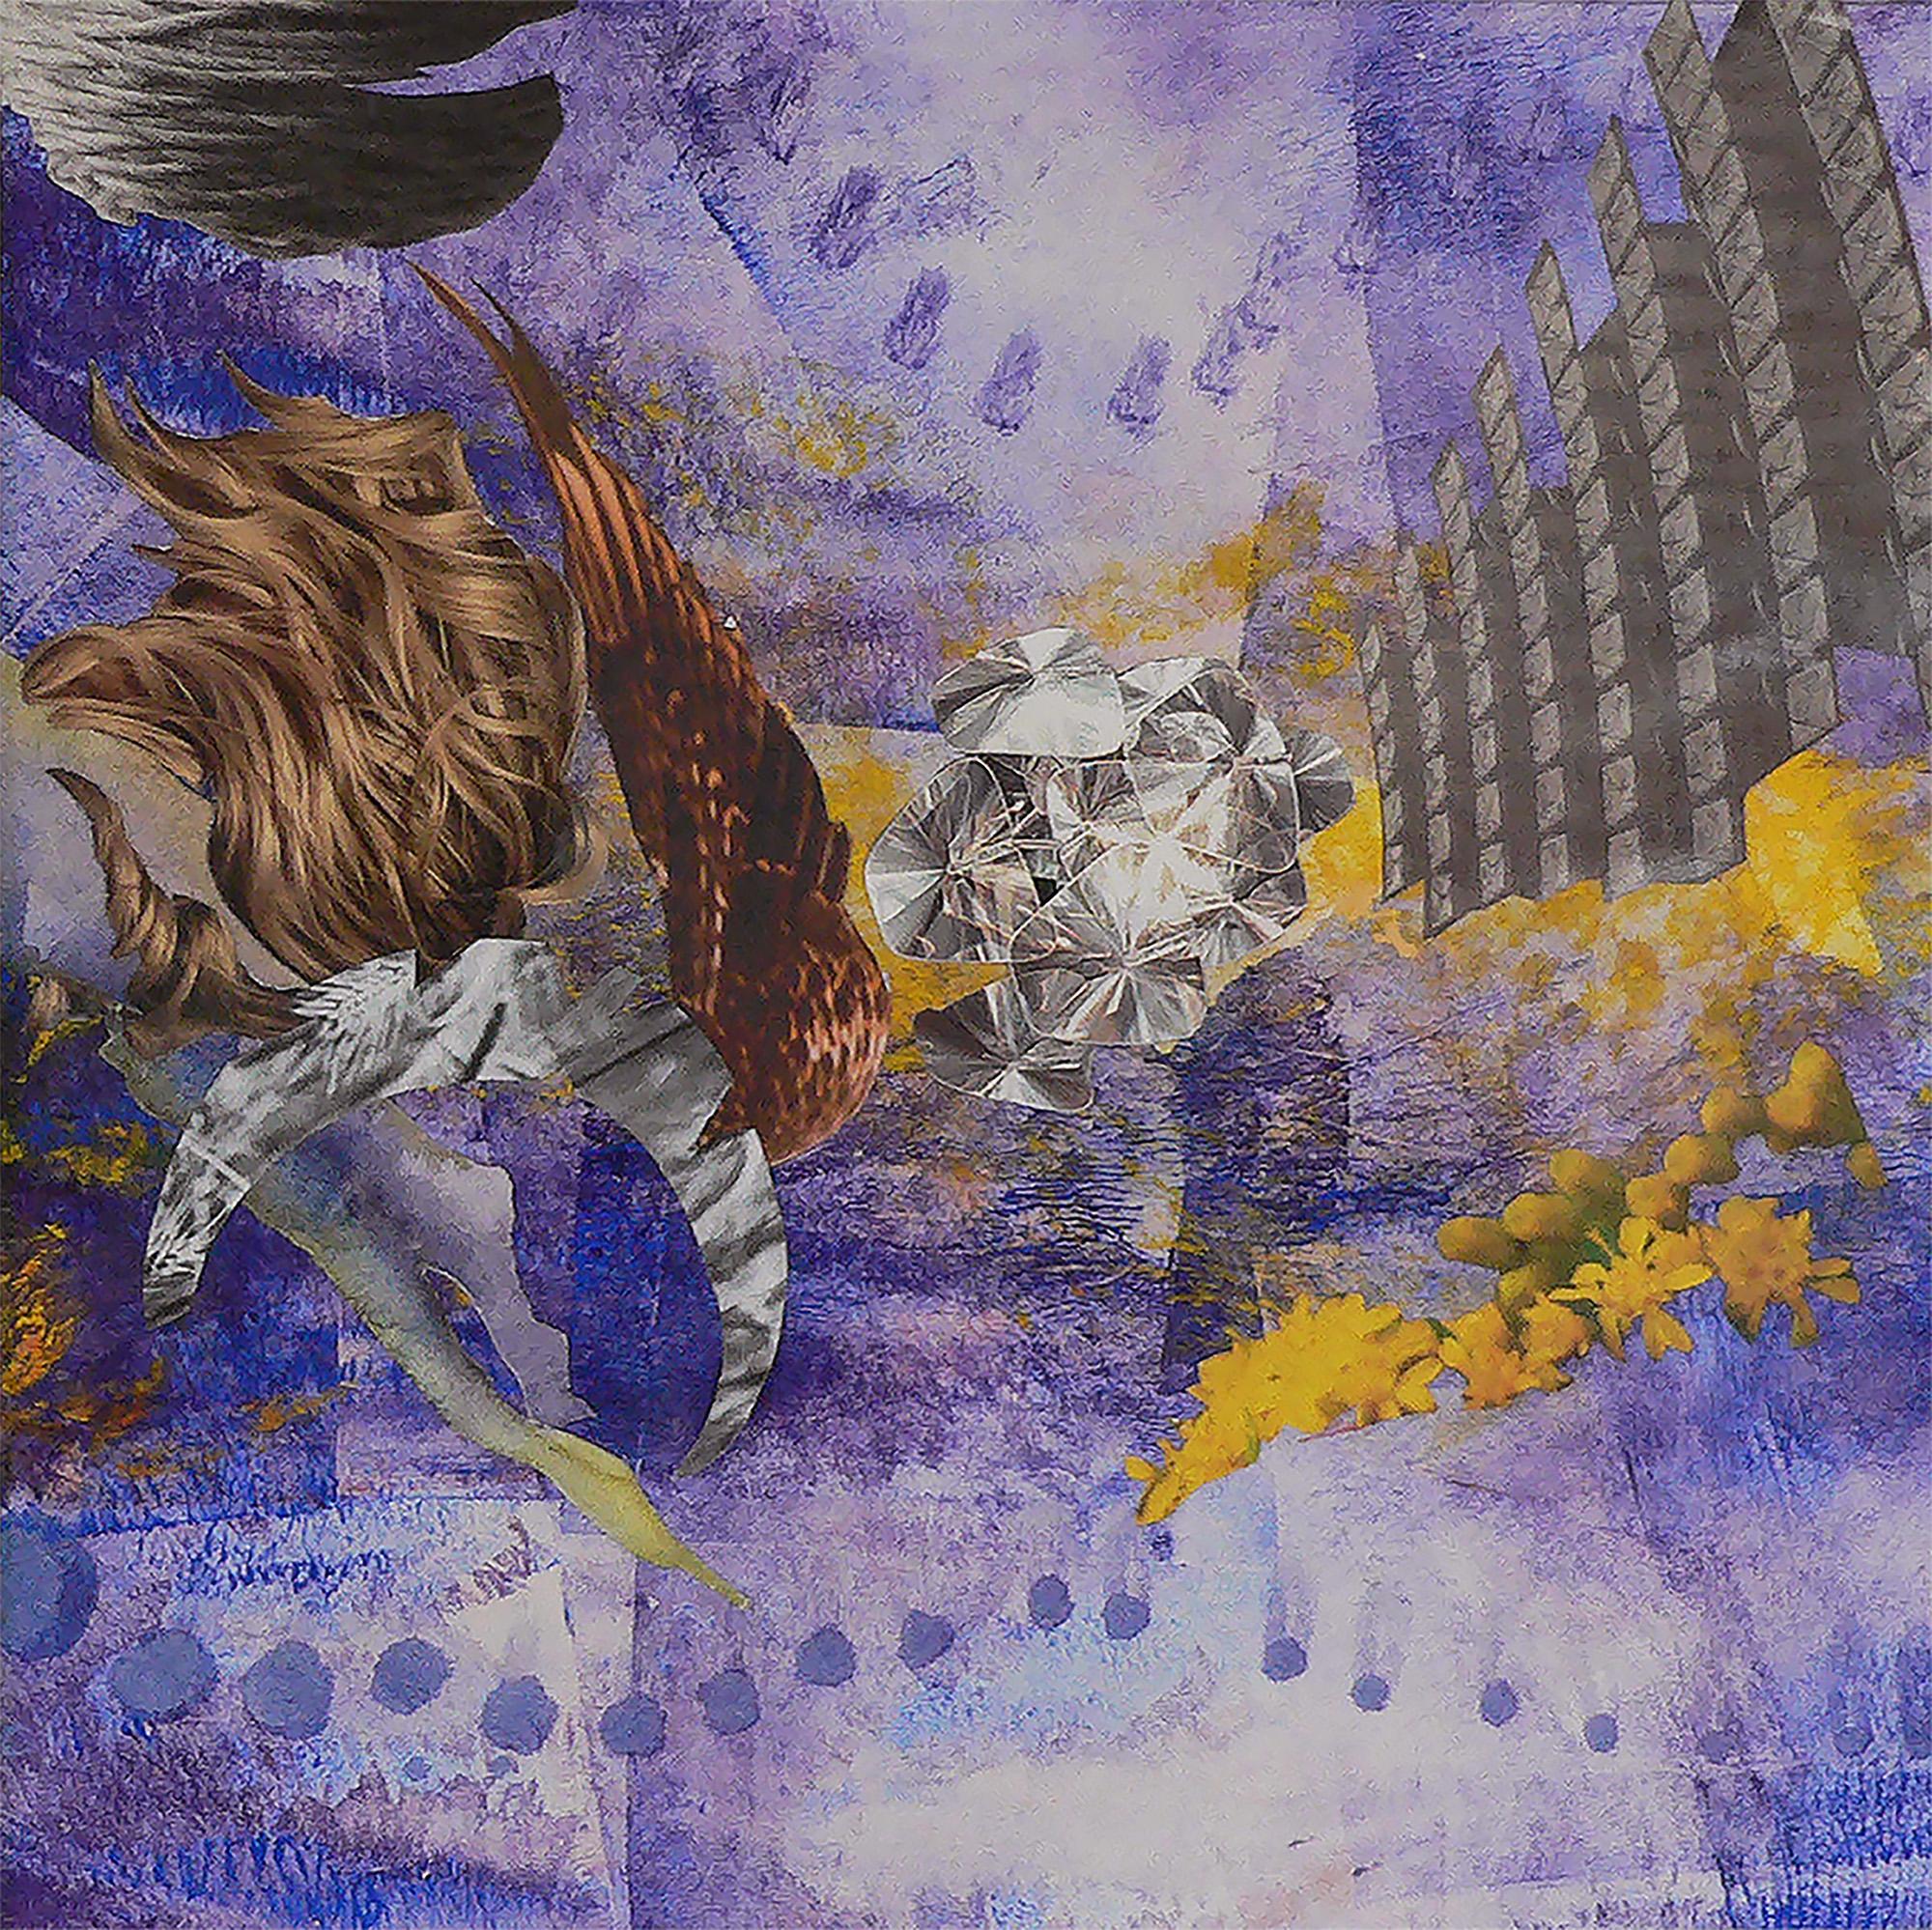 "From Here to the End", surreal, abstract, purple, golden, collage, monotype - Mixed Media Art by Monica DeSalvo